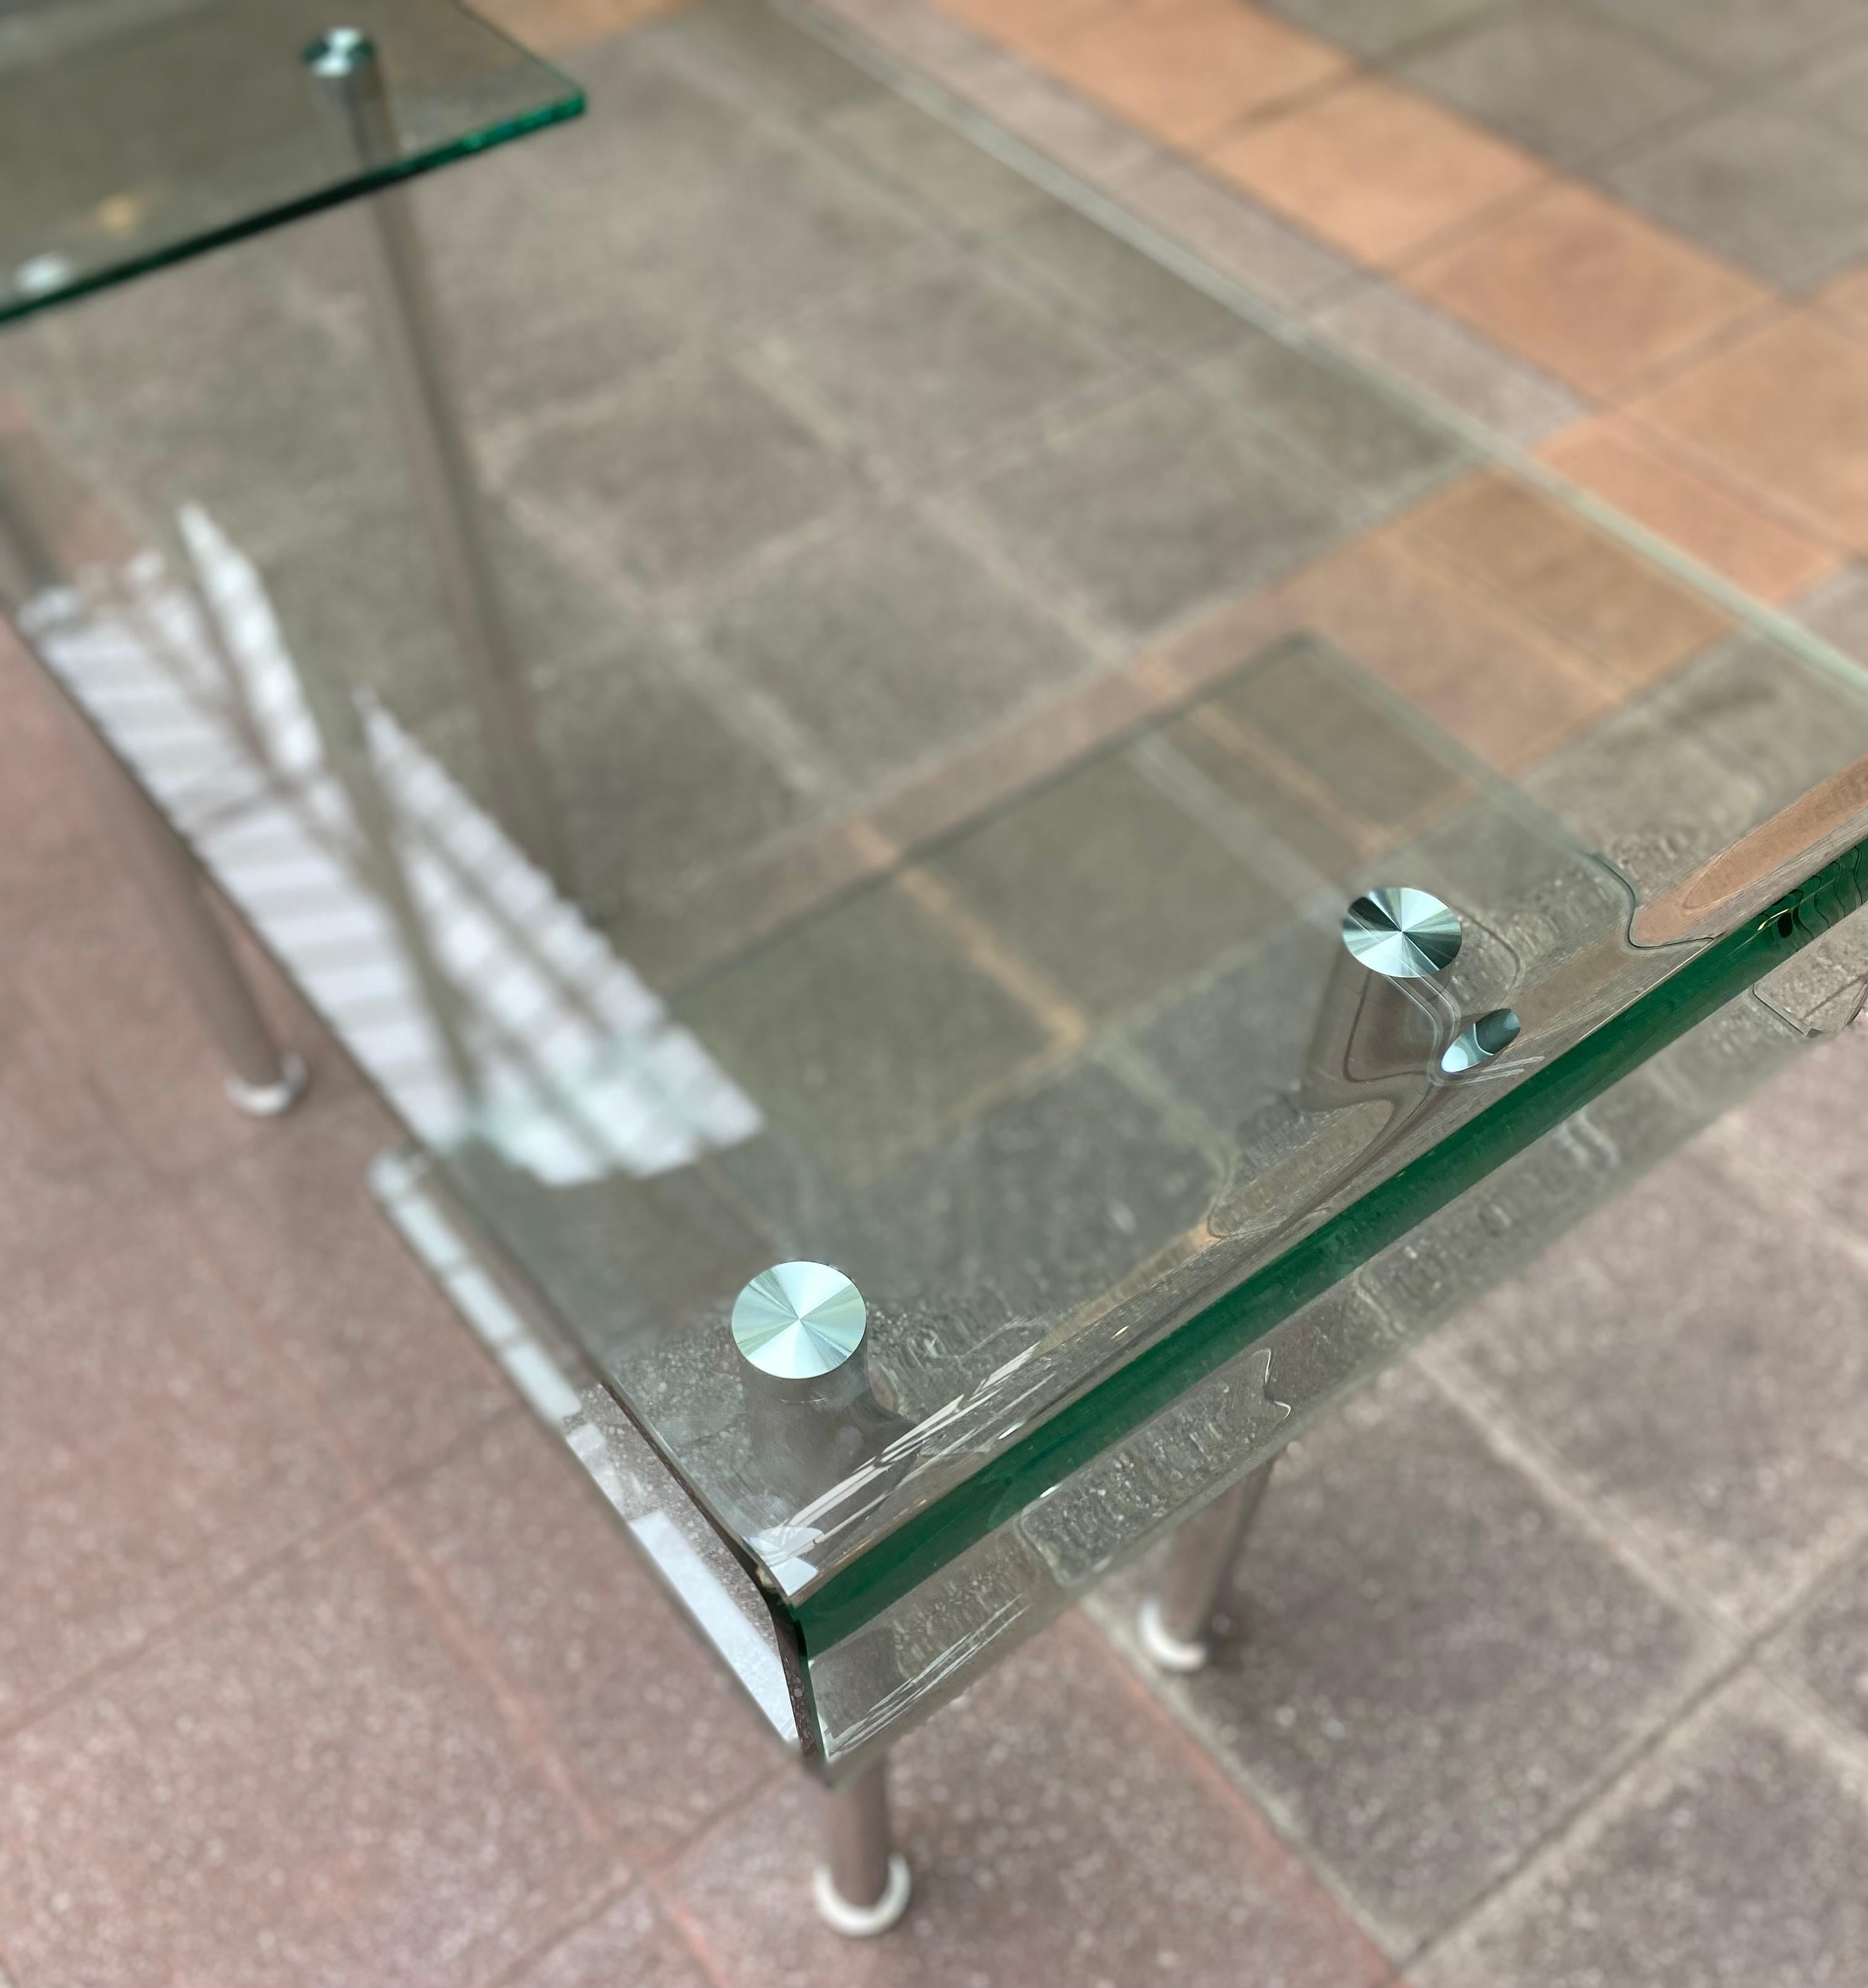 Glass desk 
Gae Aulenti ( dlg )
Glass and stainless steel 
1980
Measures: W 99 cm x D 40 x H 76 cm
Price : 1600 € for a desk.